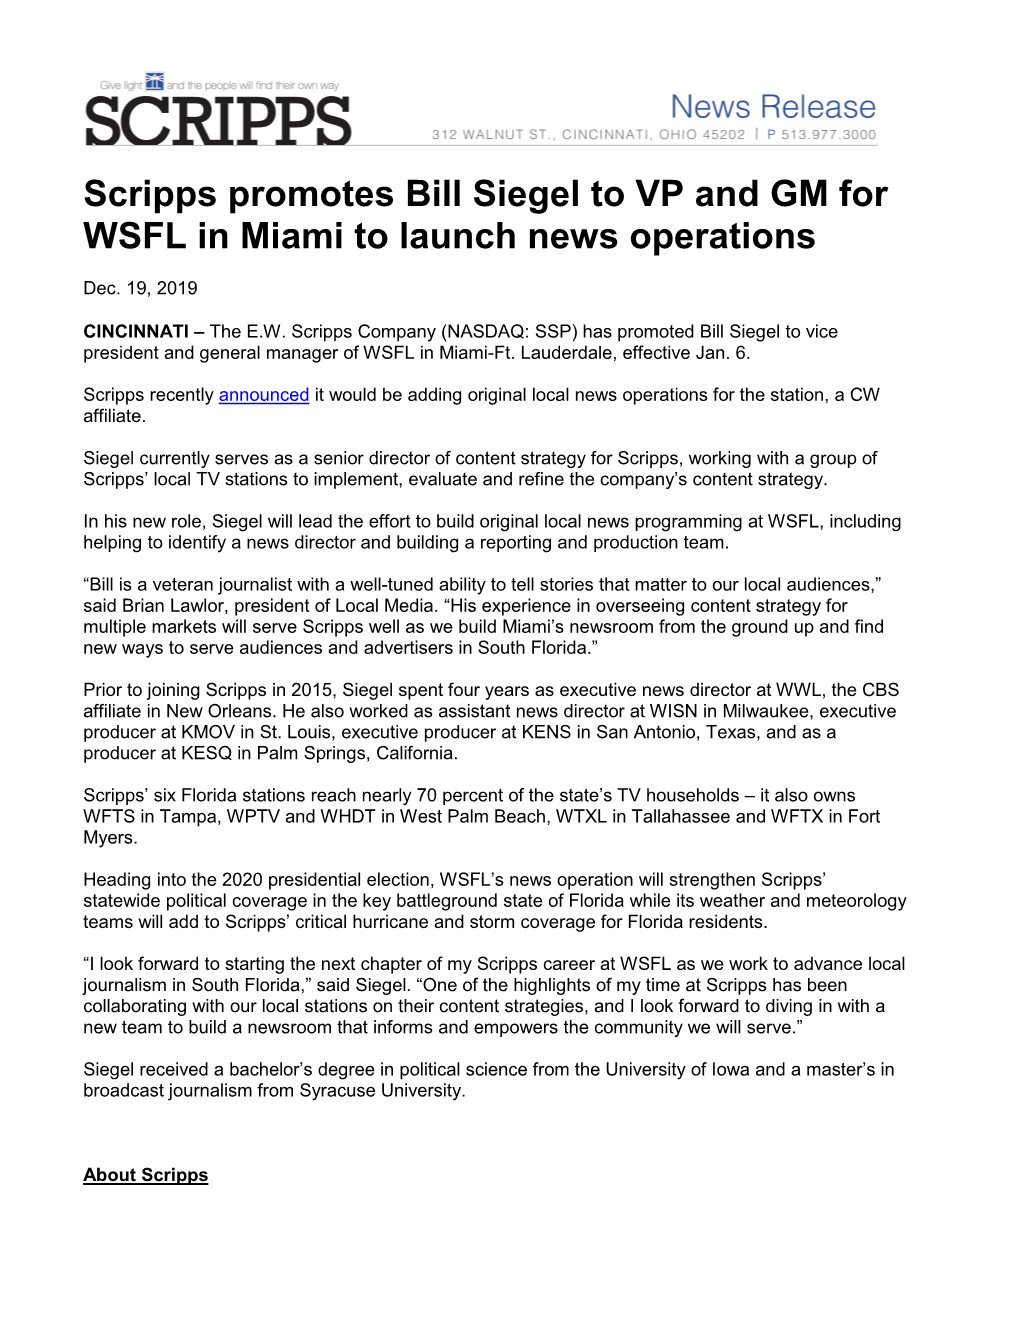 Scripps Promotes Bill Siegel to VP and GM for WSFL in Miami to Launch News Operations